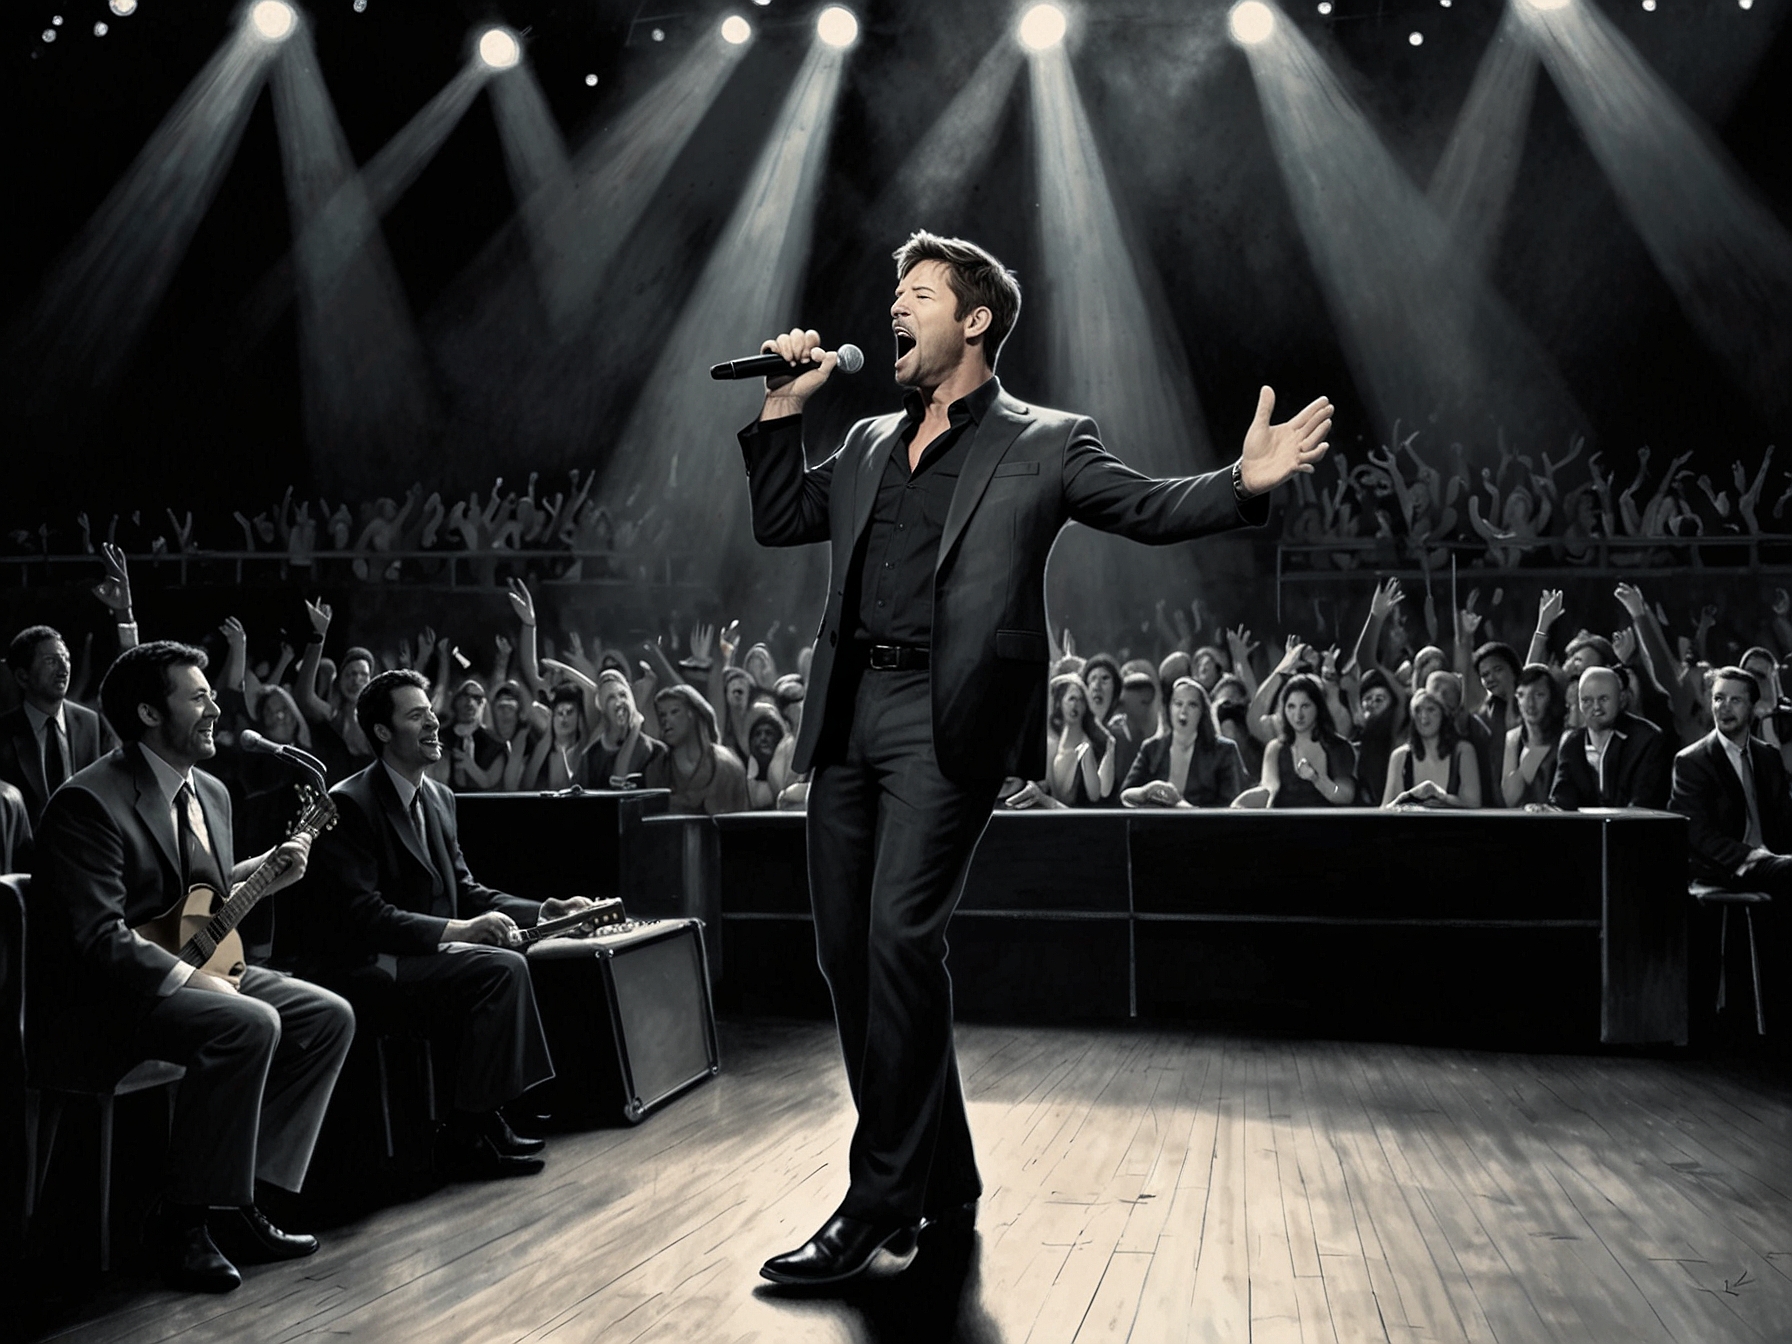 A scene featuring Harry Connick Jr. as an aging rock star performing on stage, capturing both his charisma and the nostalgia of his former glory days.